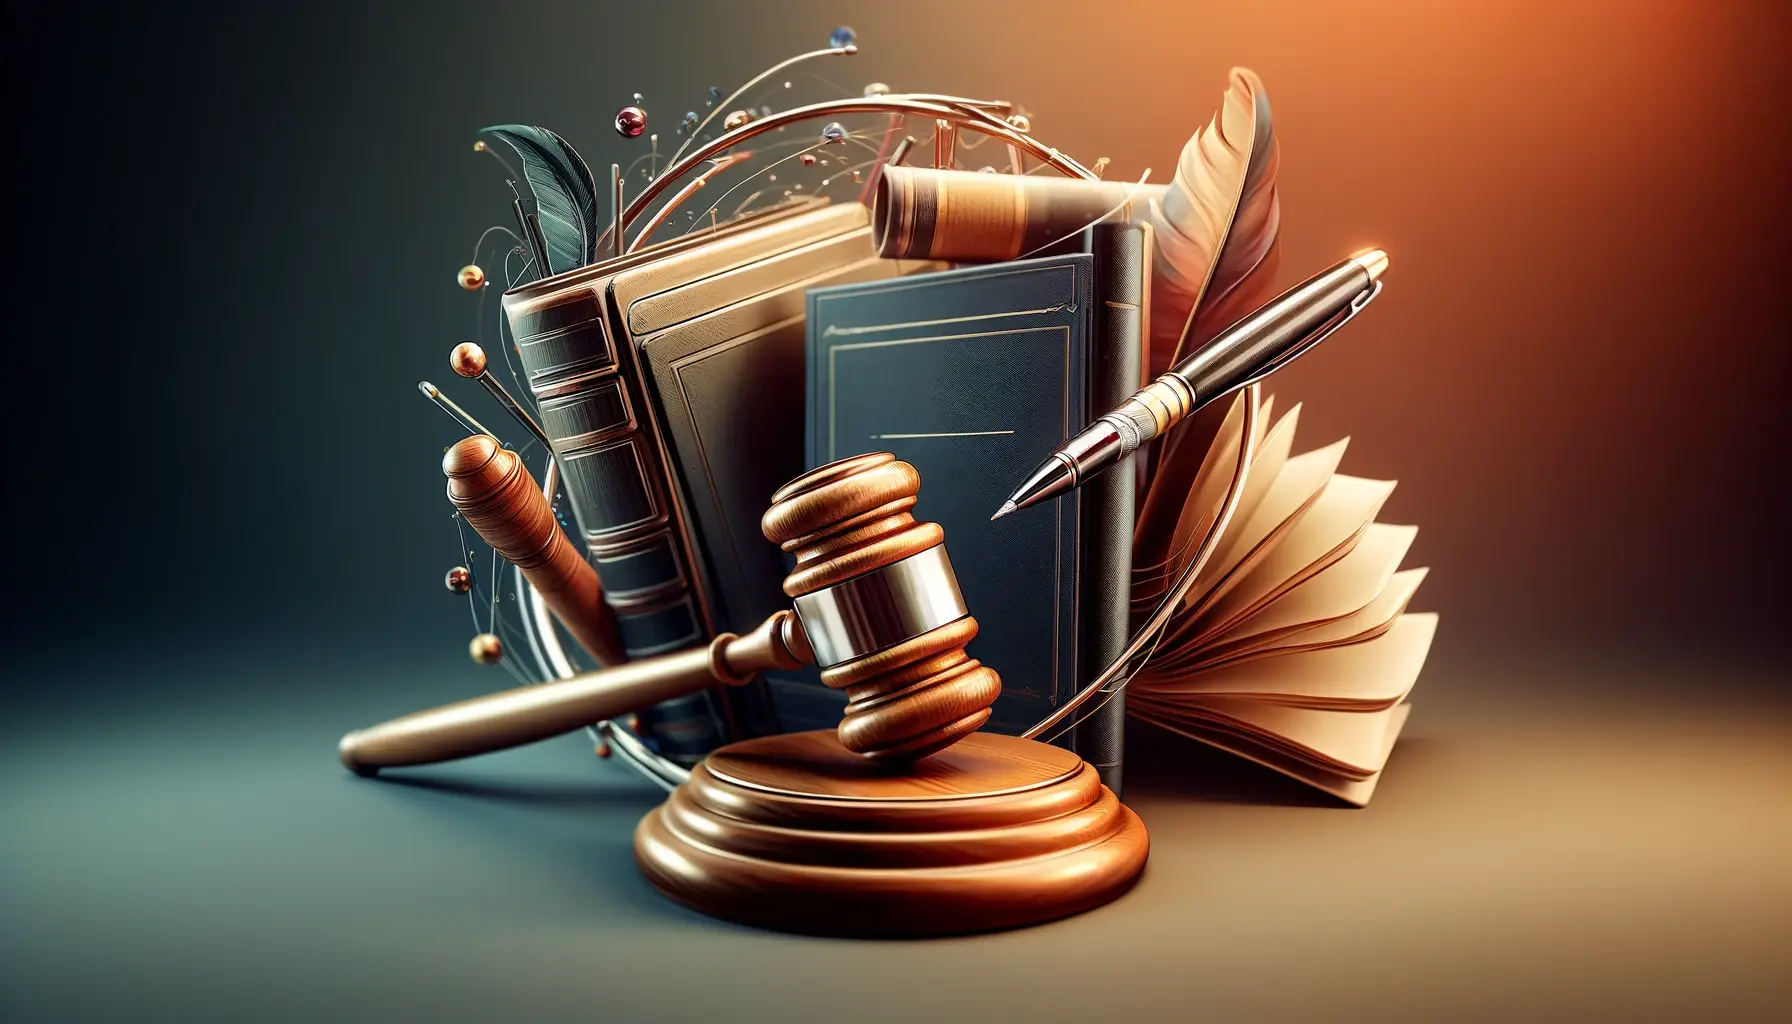 A conceptual image representing the legal aspects of publishing, featuring a gavel, books, and a pen, symbolizing the intersection of law and literatu